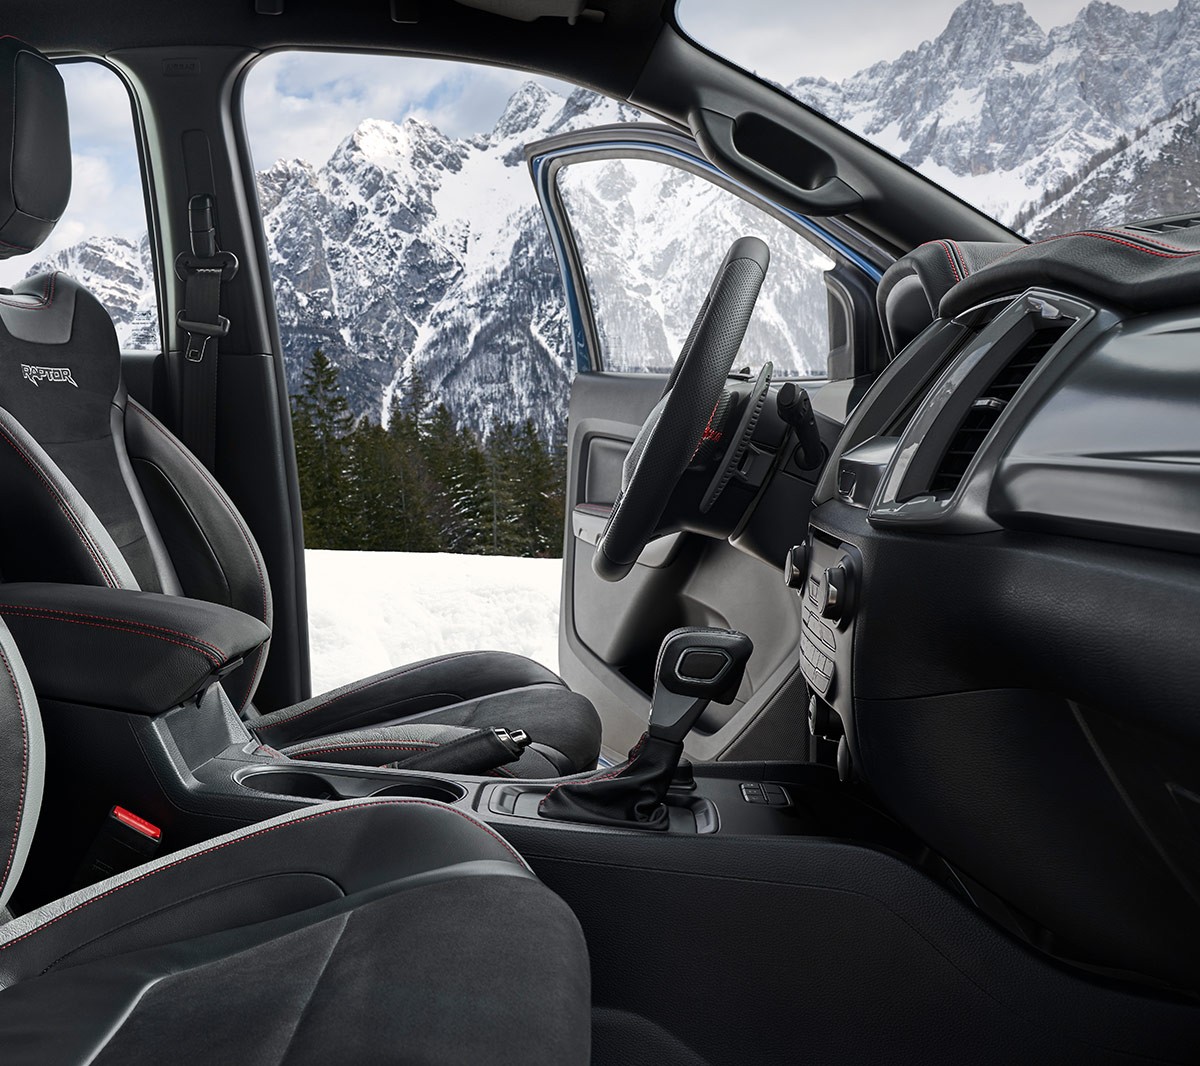 Ford Ranger Raptor Special Edition interior view